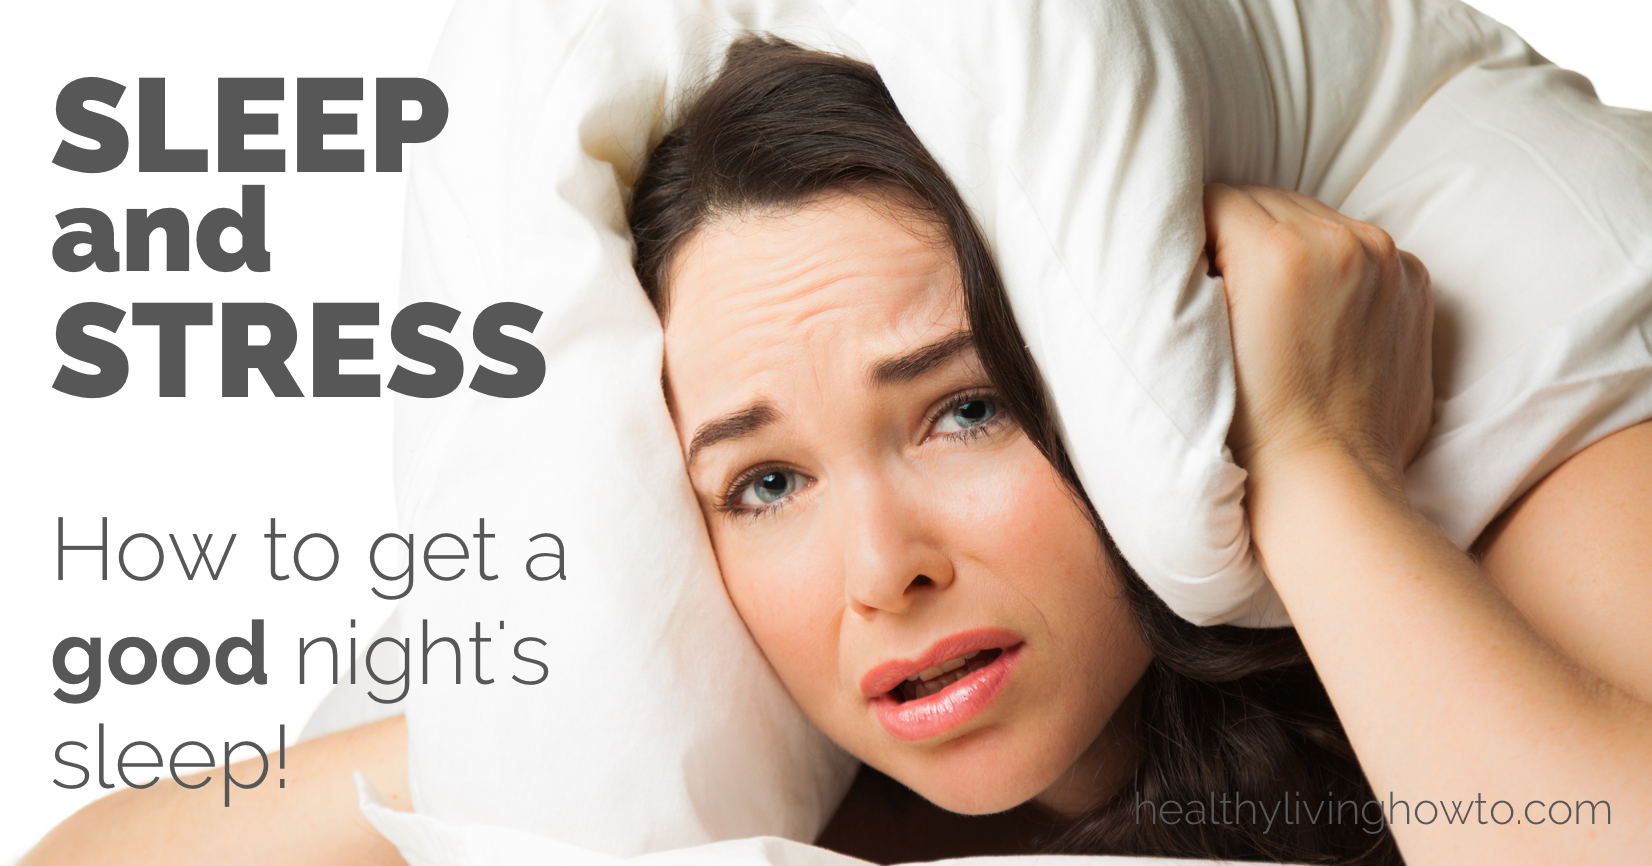 Sleep & Stress. Why You're Not Sawing Logs | healthylivinghowto.com